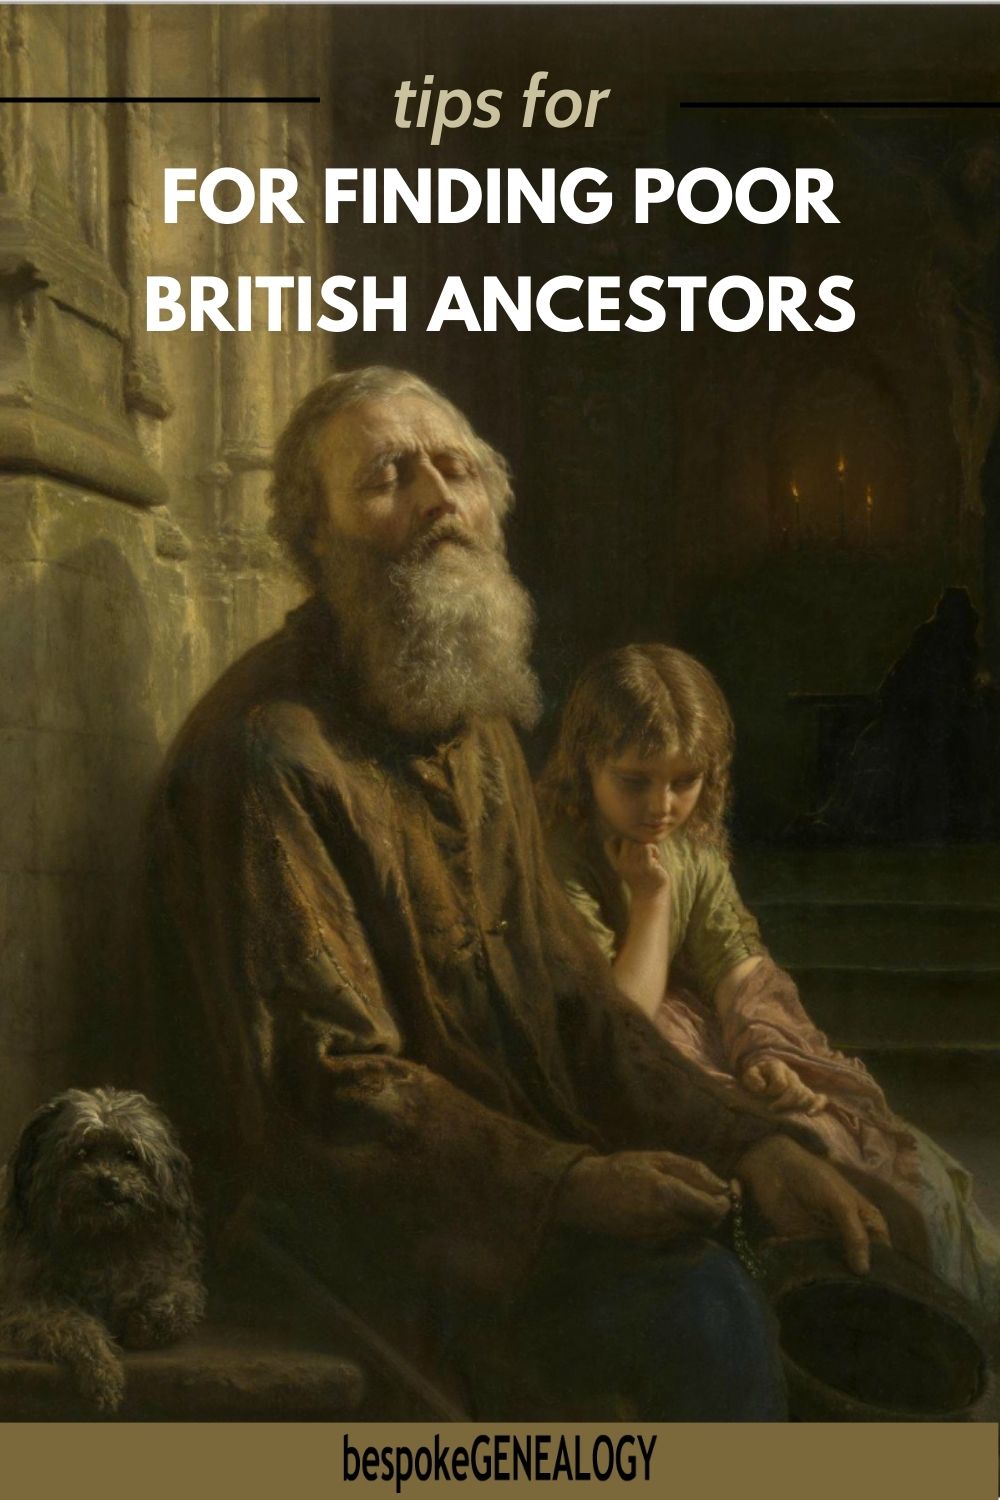 Tips for finding poor British ancestors. Painting of an old bearded man begging on the street.